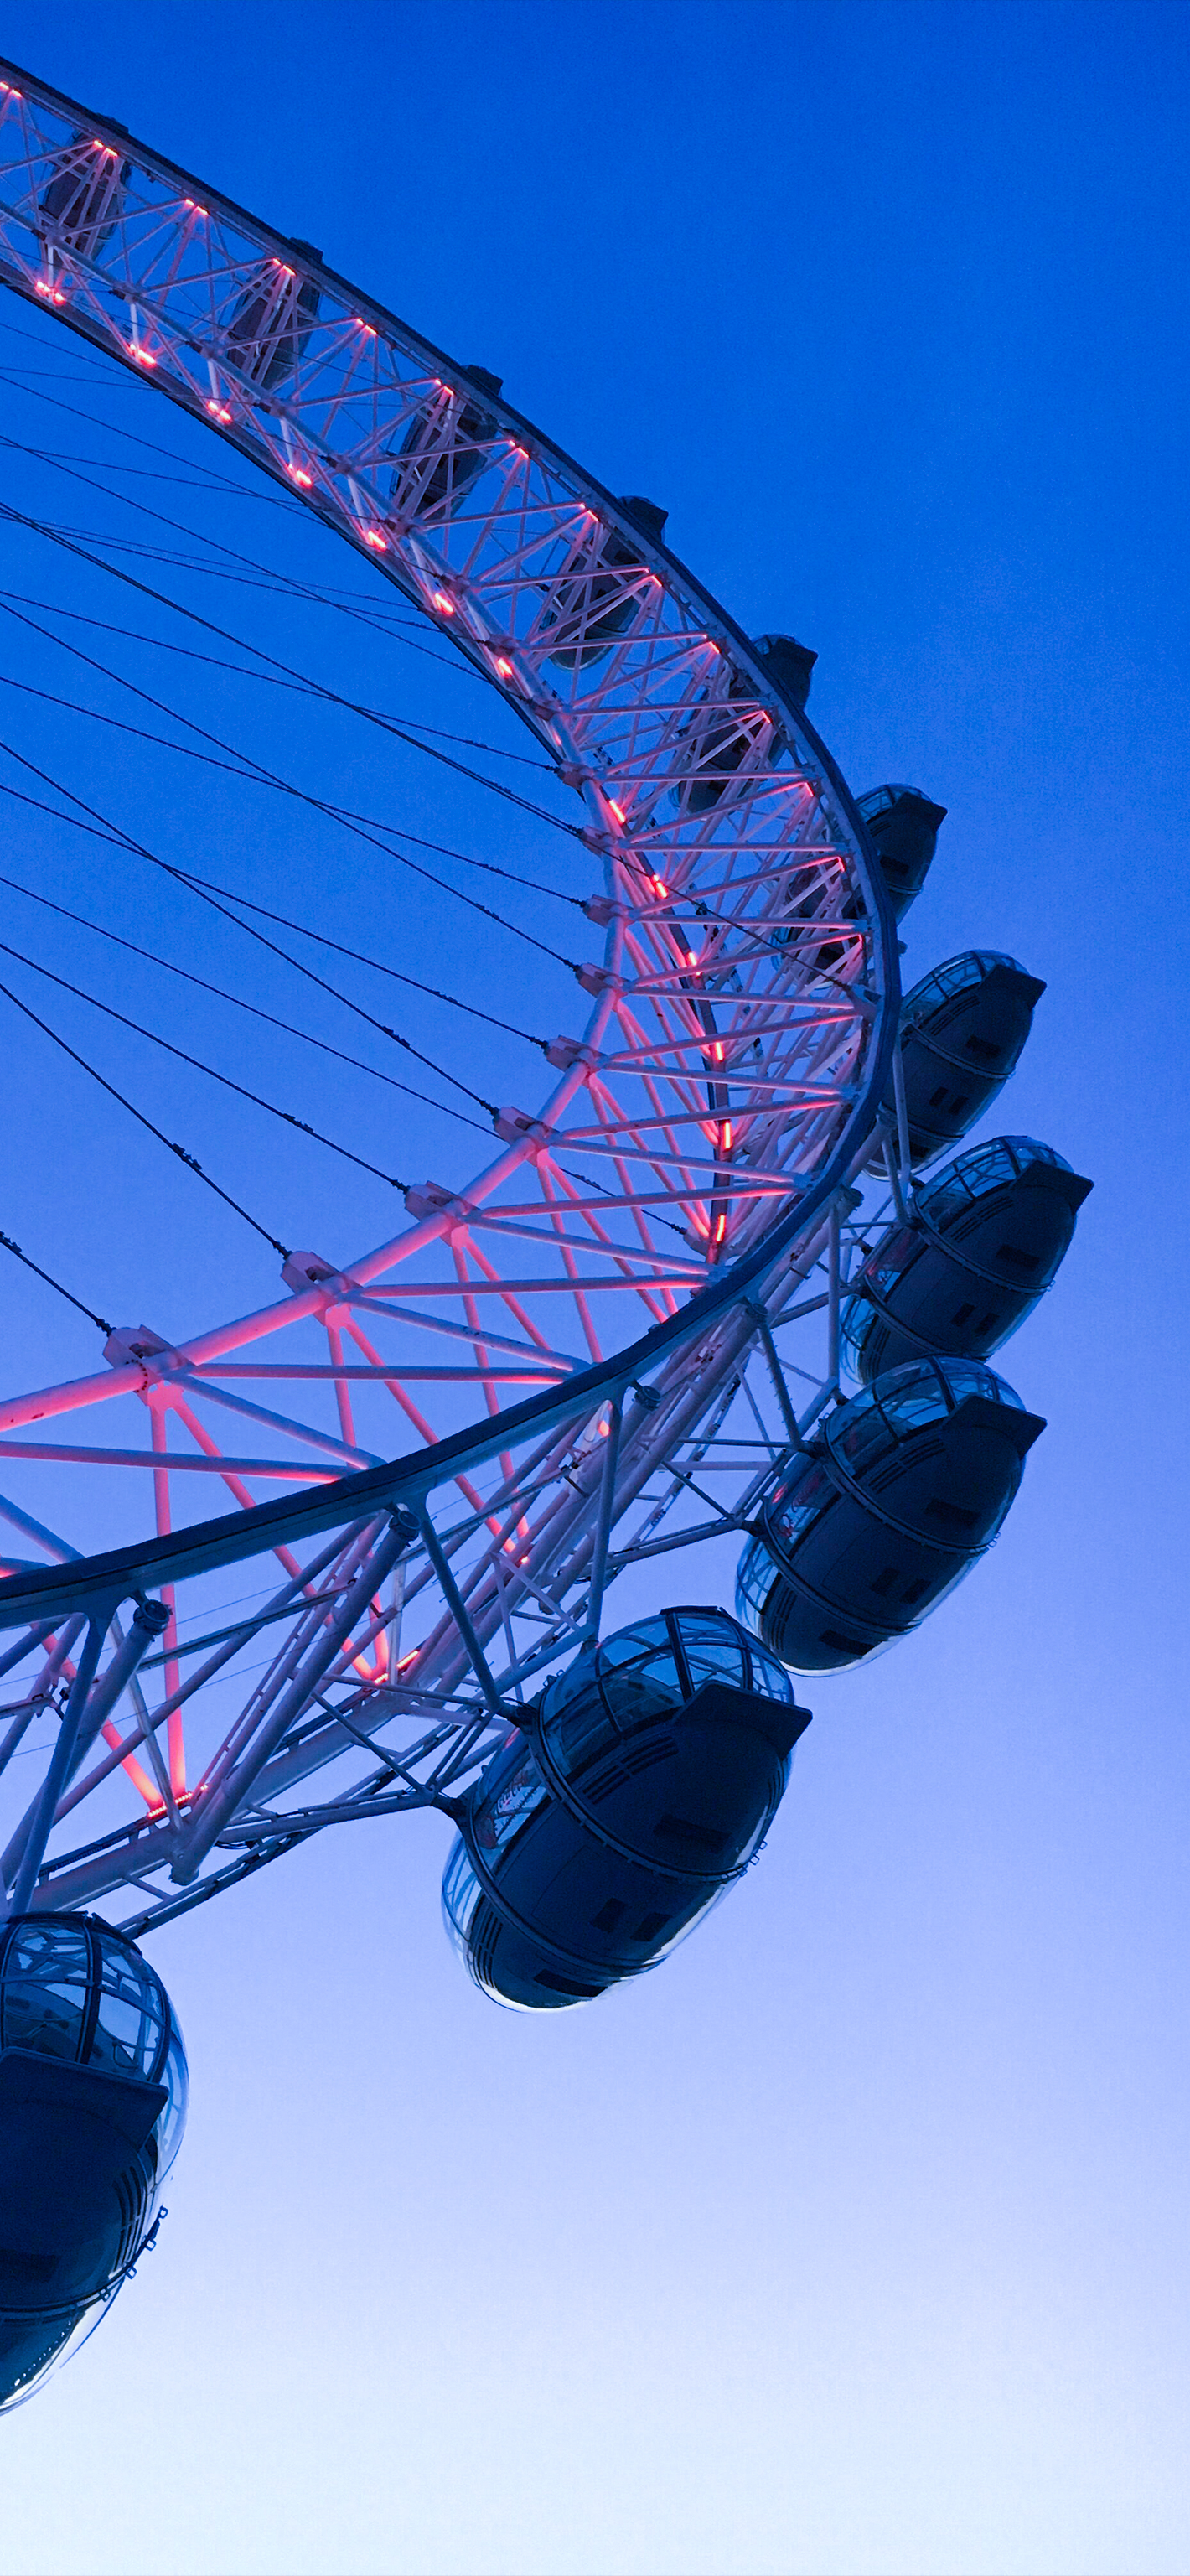 400+ London Eye Pictures and Images in HD - Pixabay